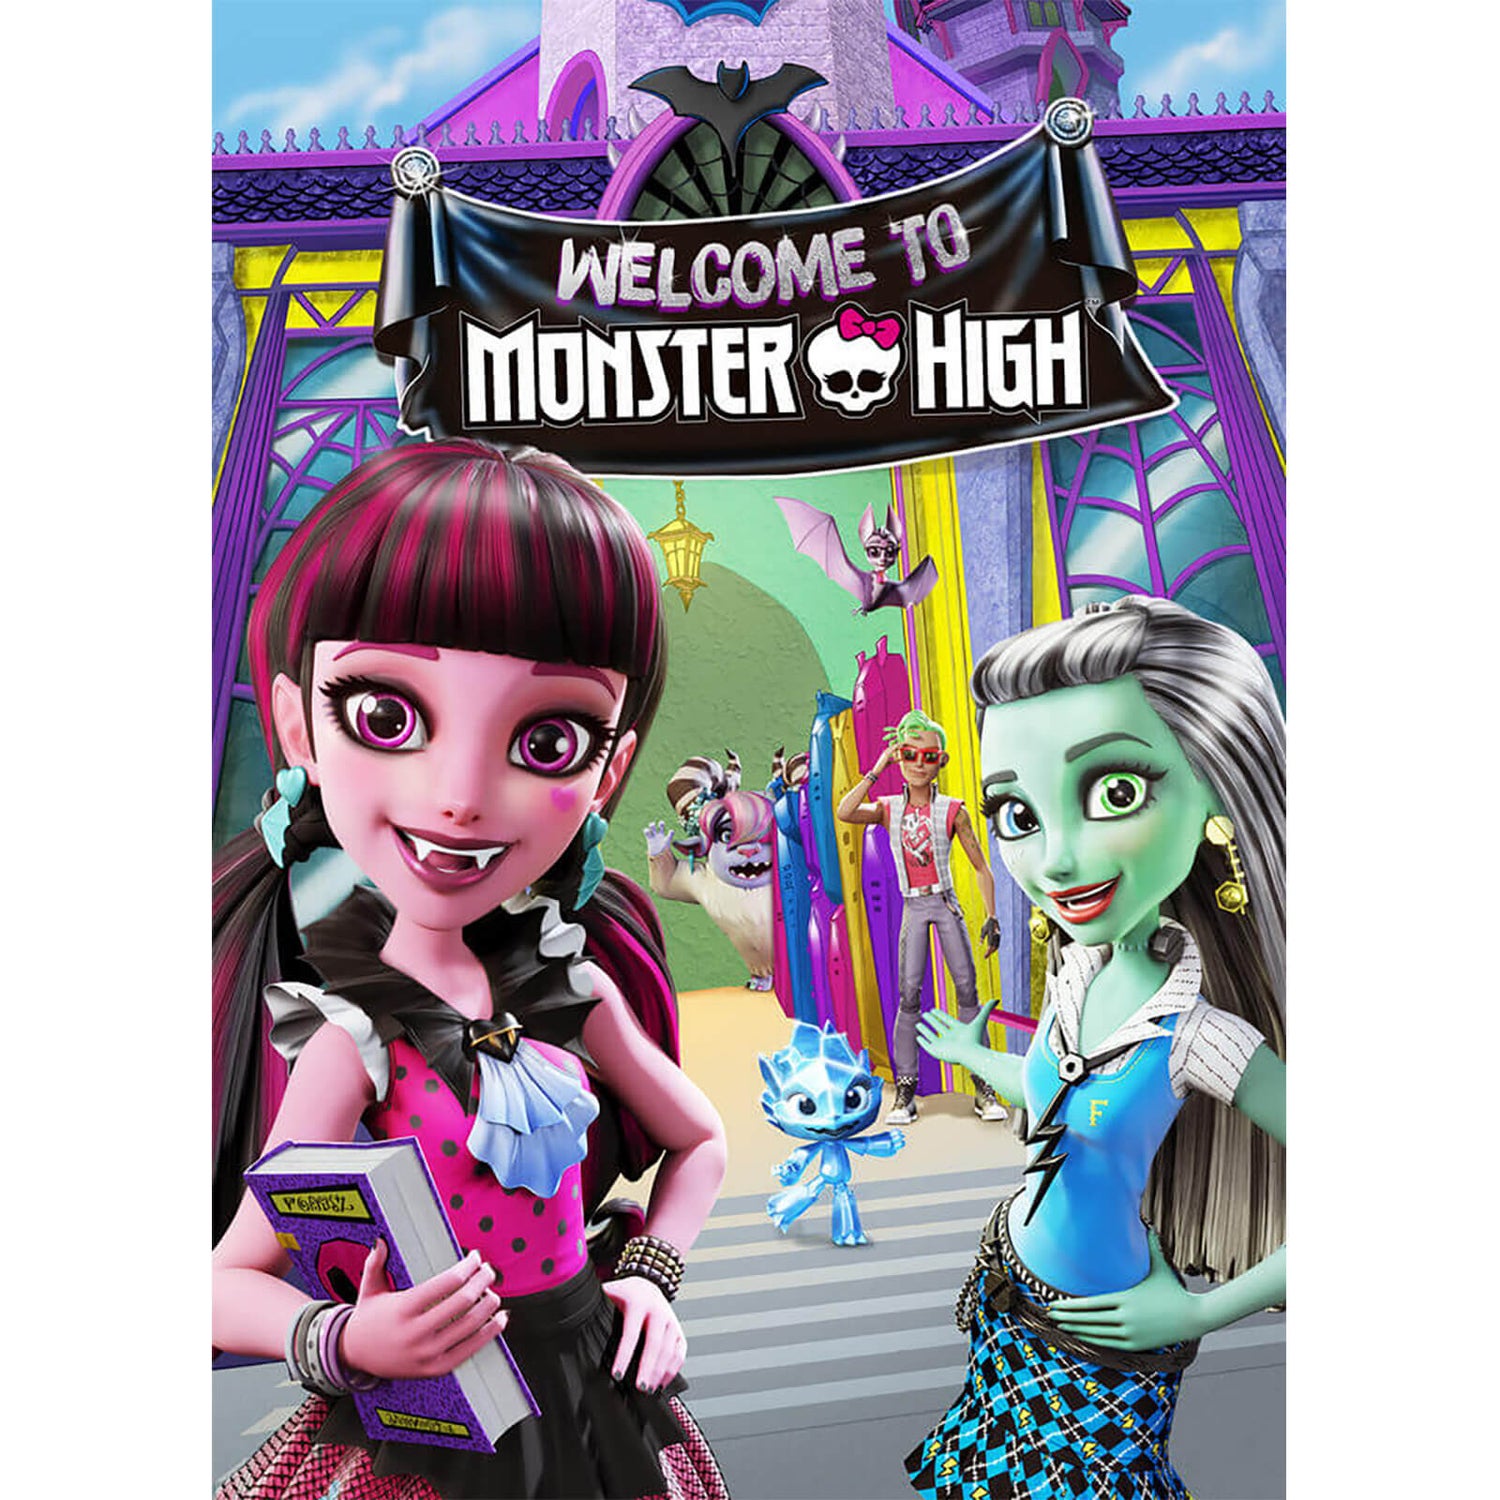 Welcome to Monster High - Includes Monster High Gift